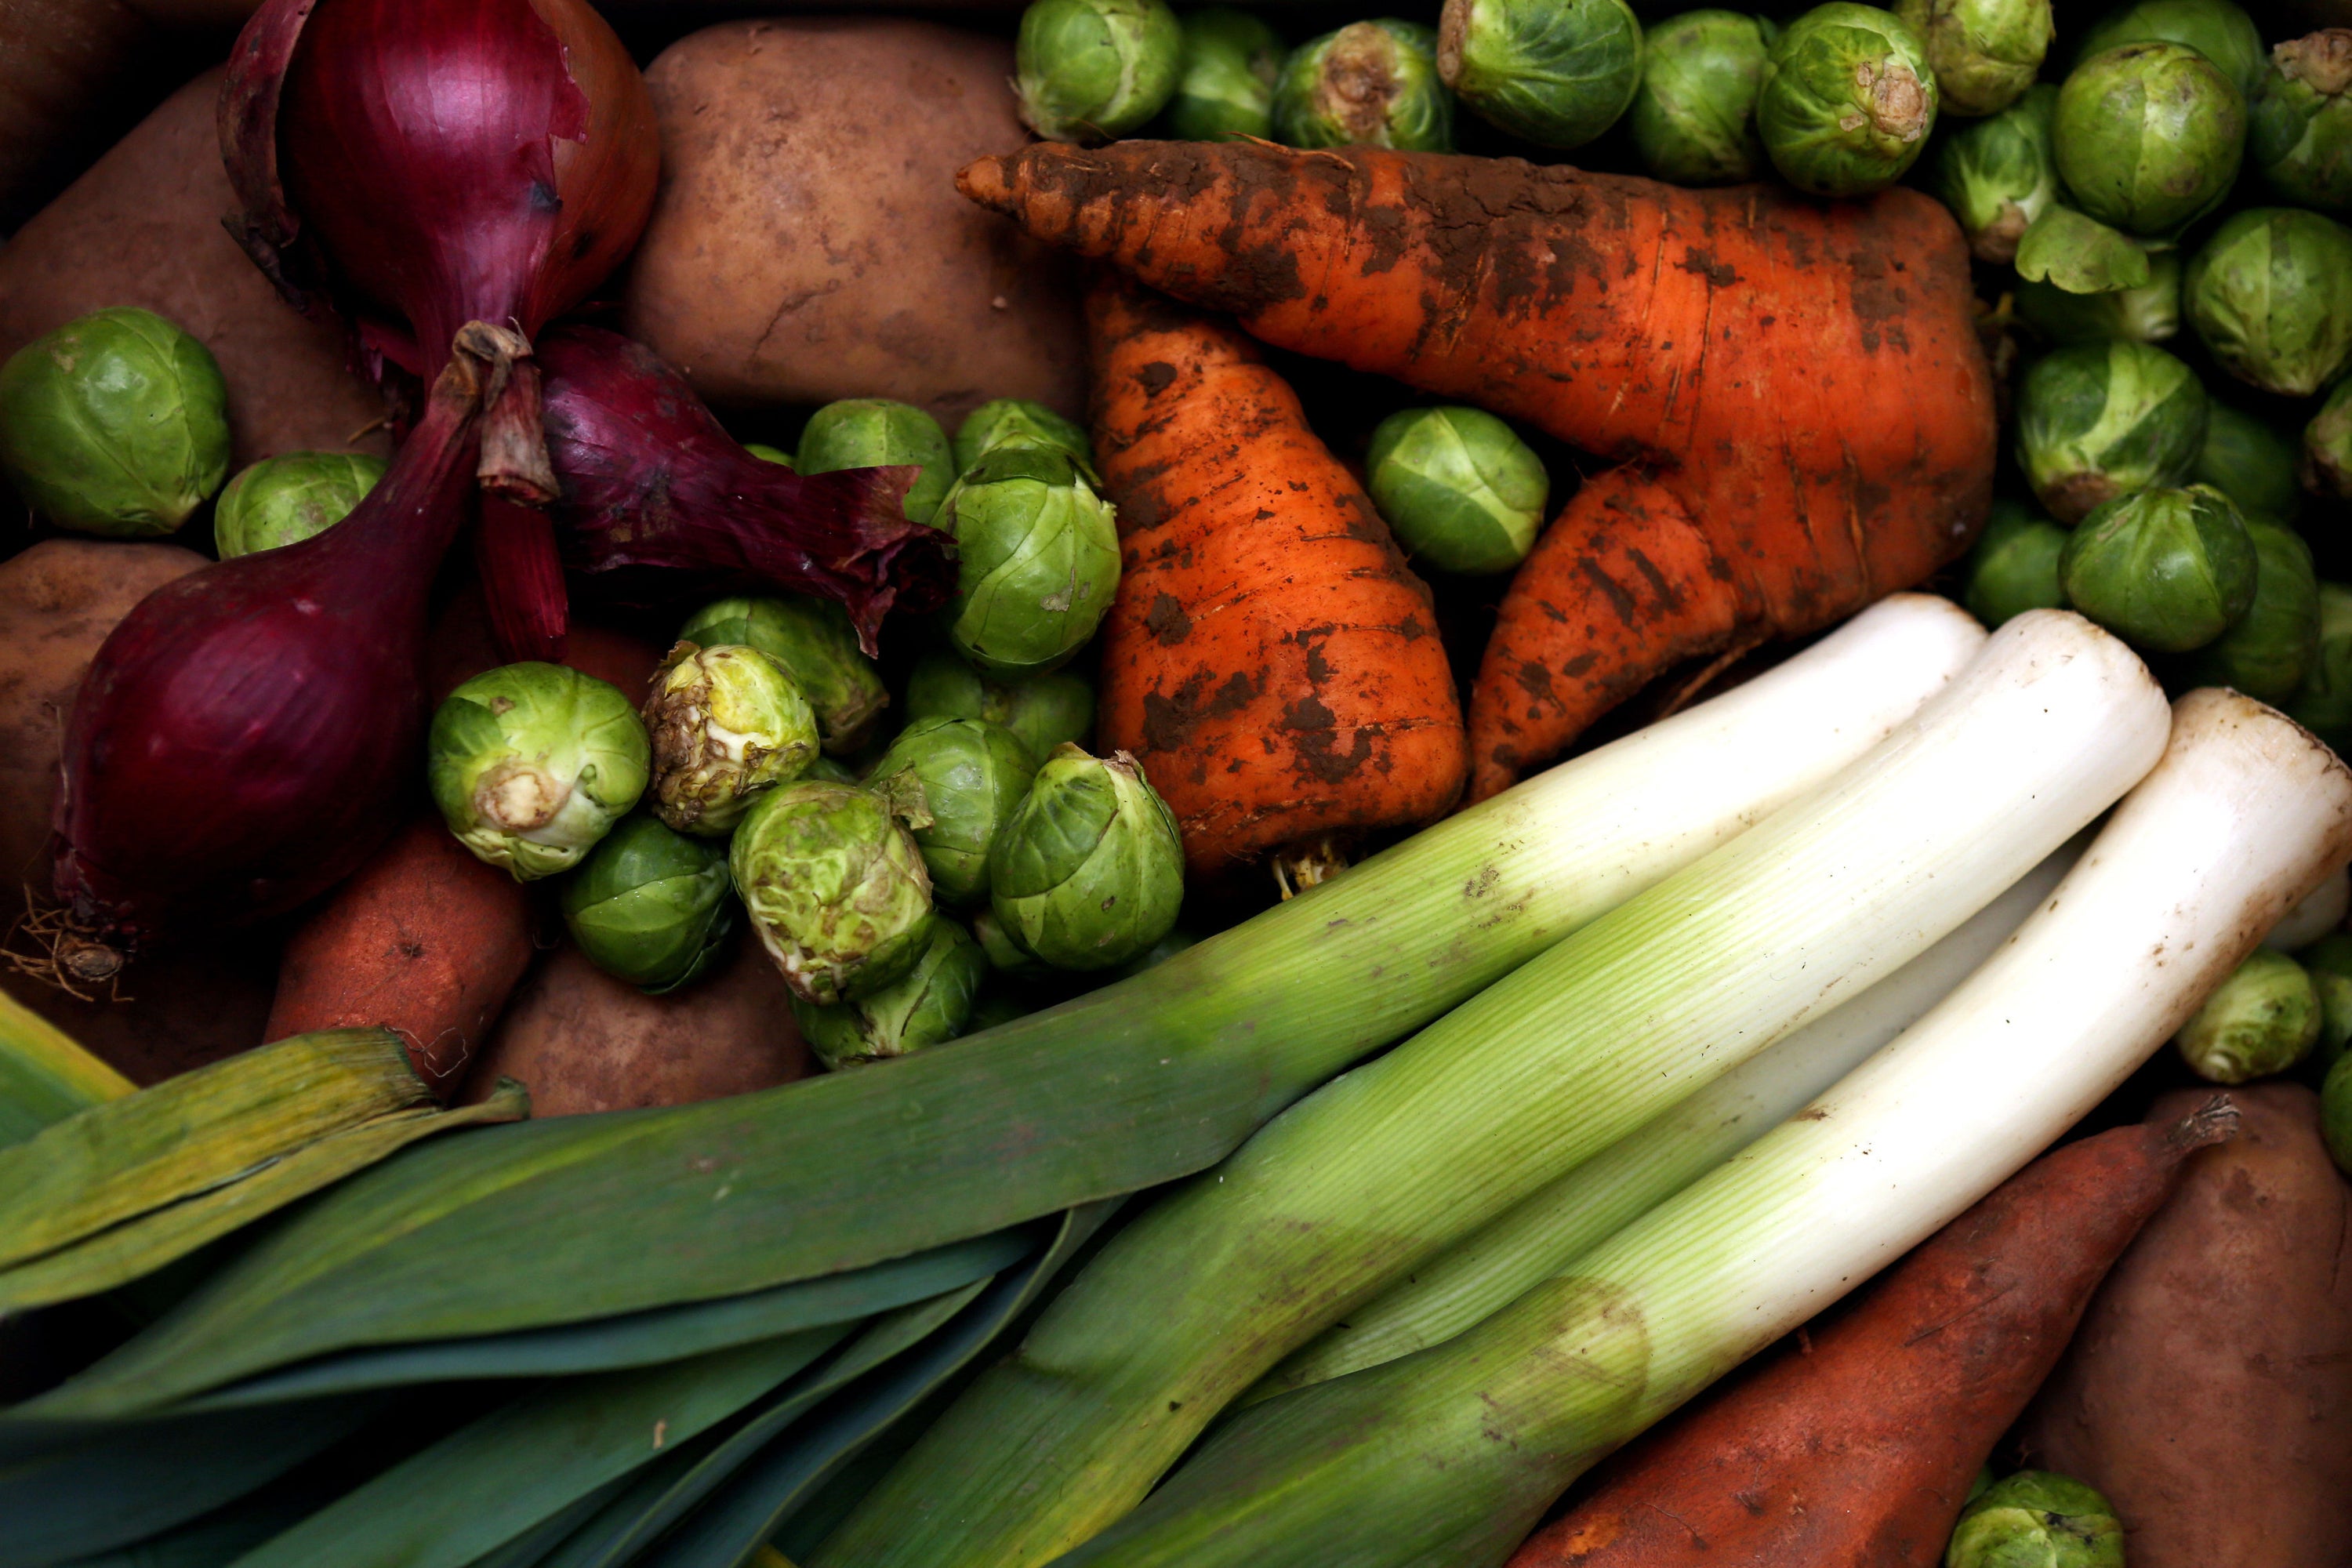 People are swapping meat for vegetables to save money